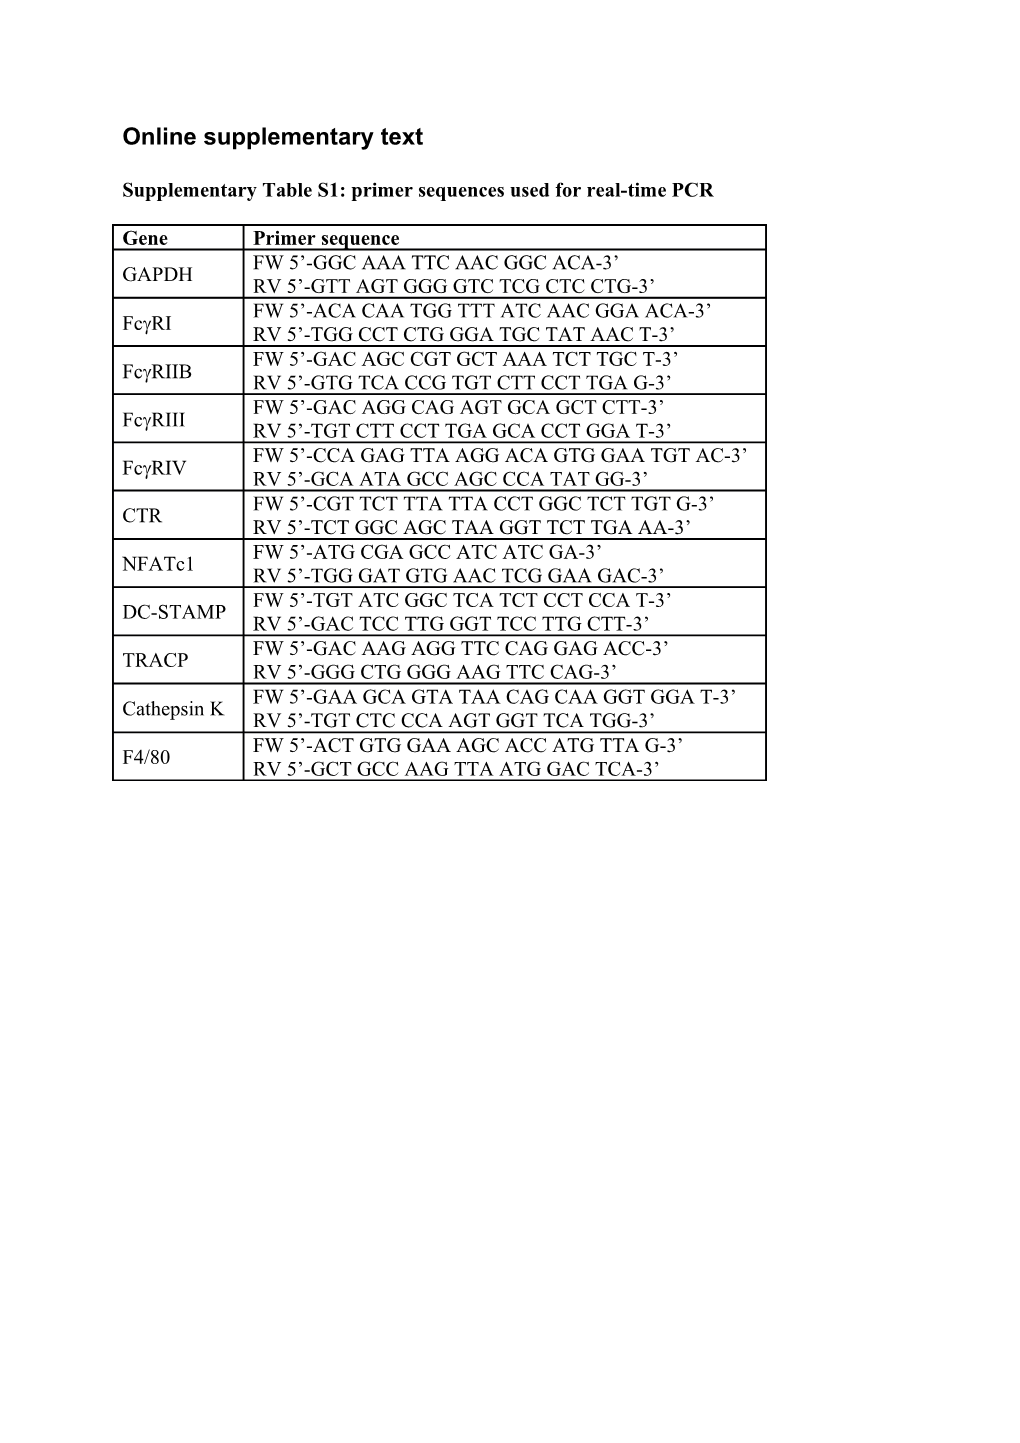 Supplementary Table S1: Primer Sequences Used for Real-Time PCR